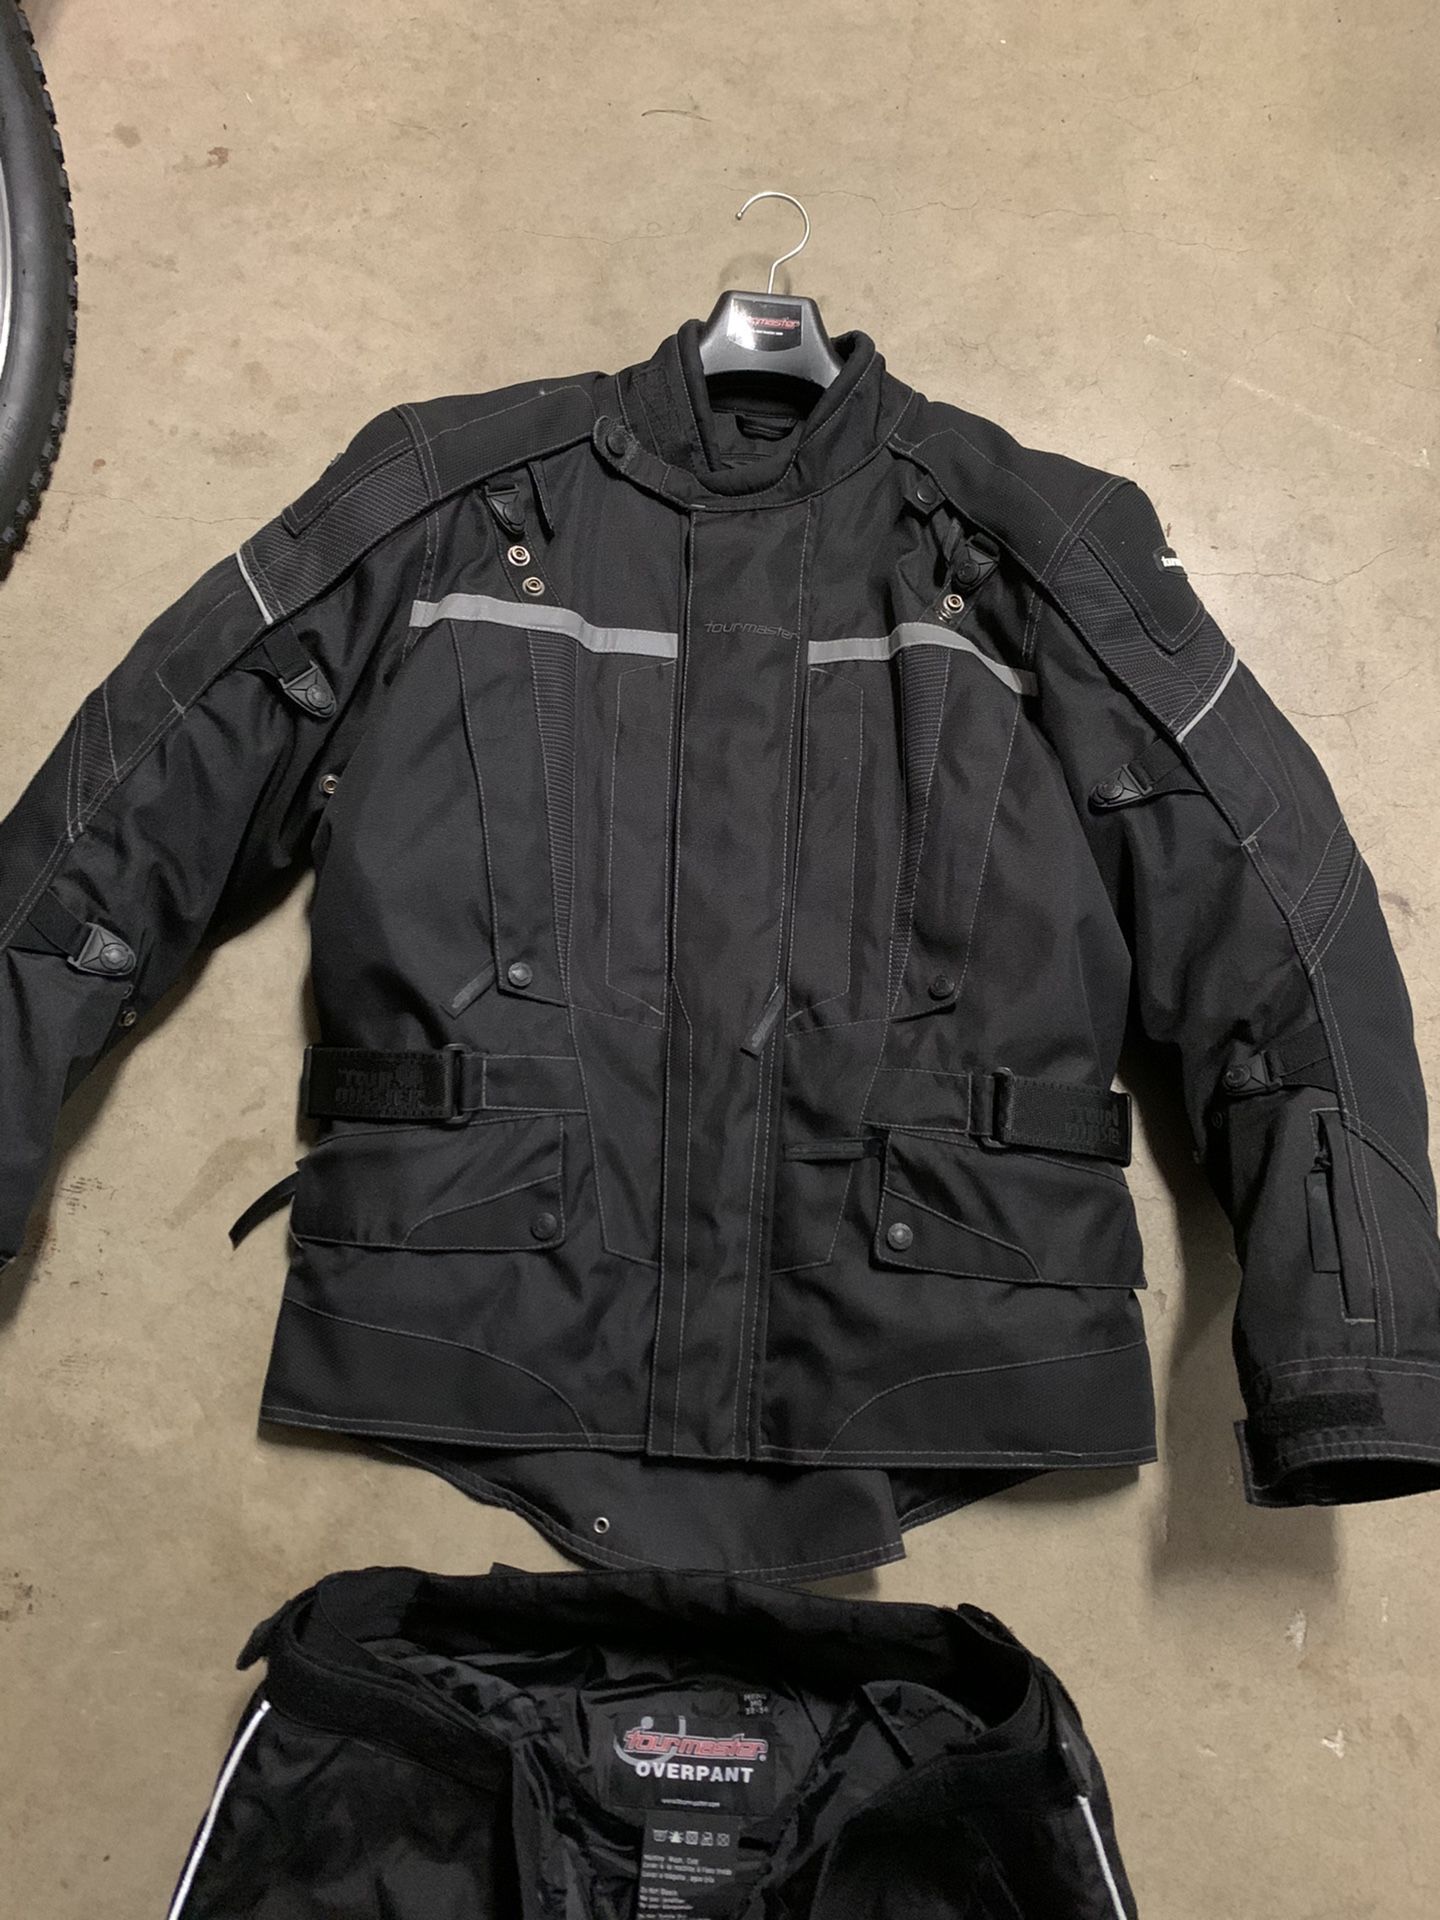 Tourmaster Transition Cold Weather Motorcycle Gear